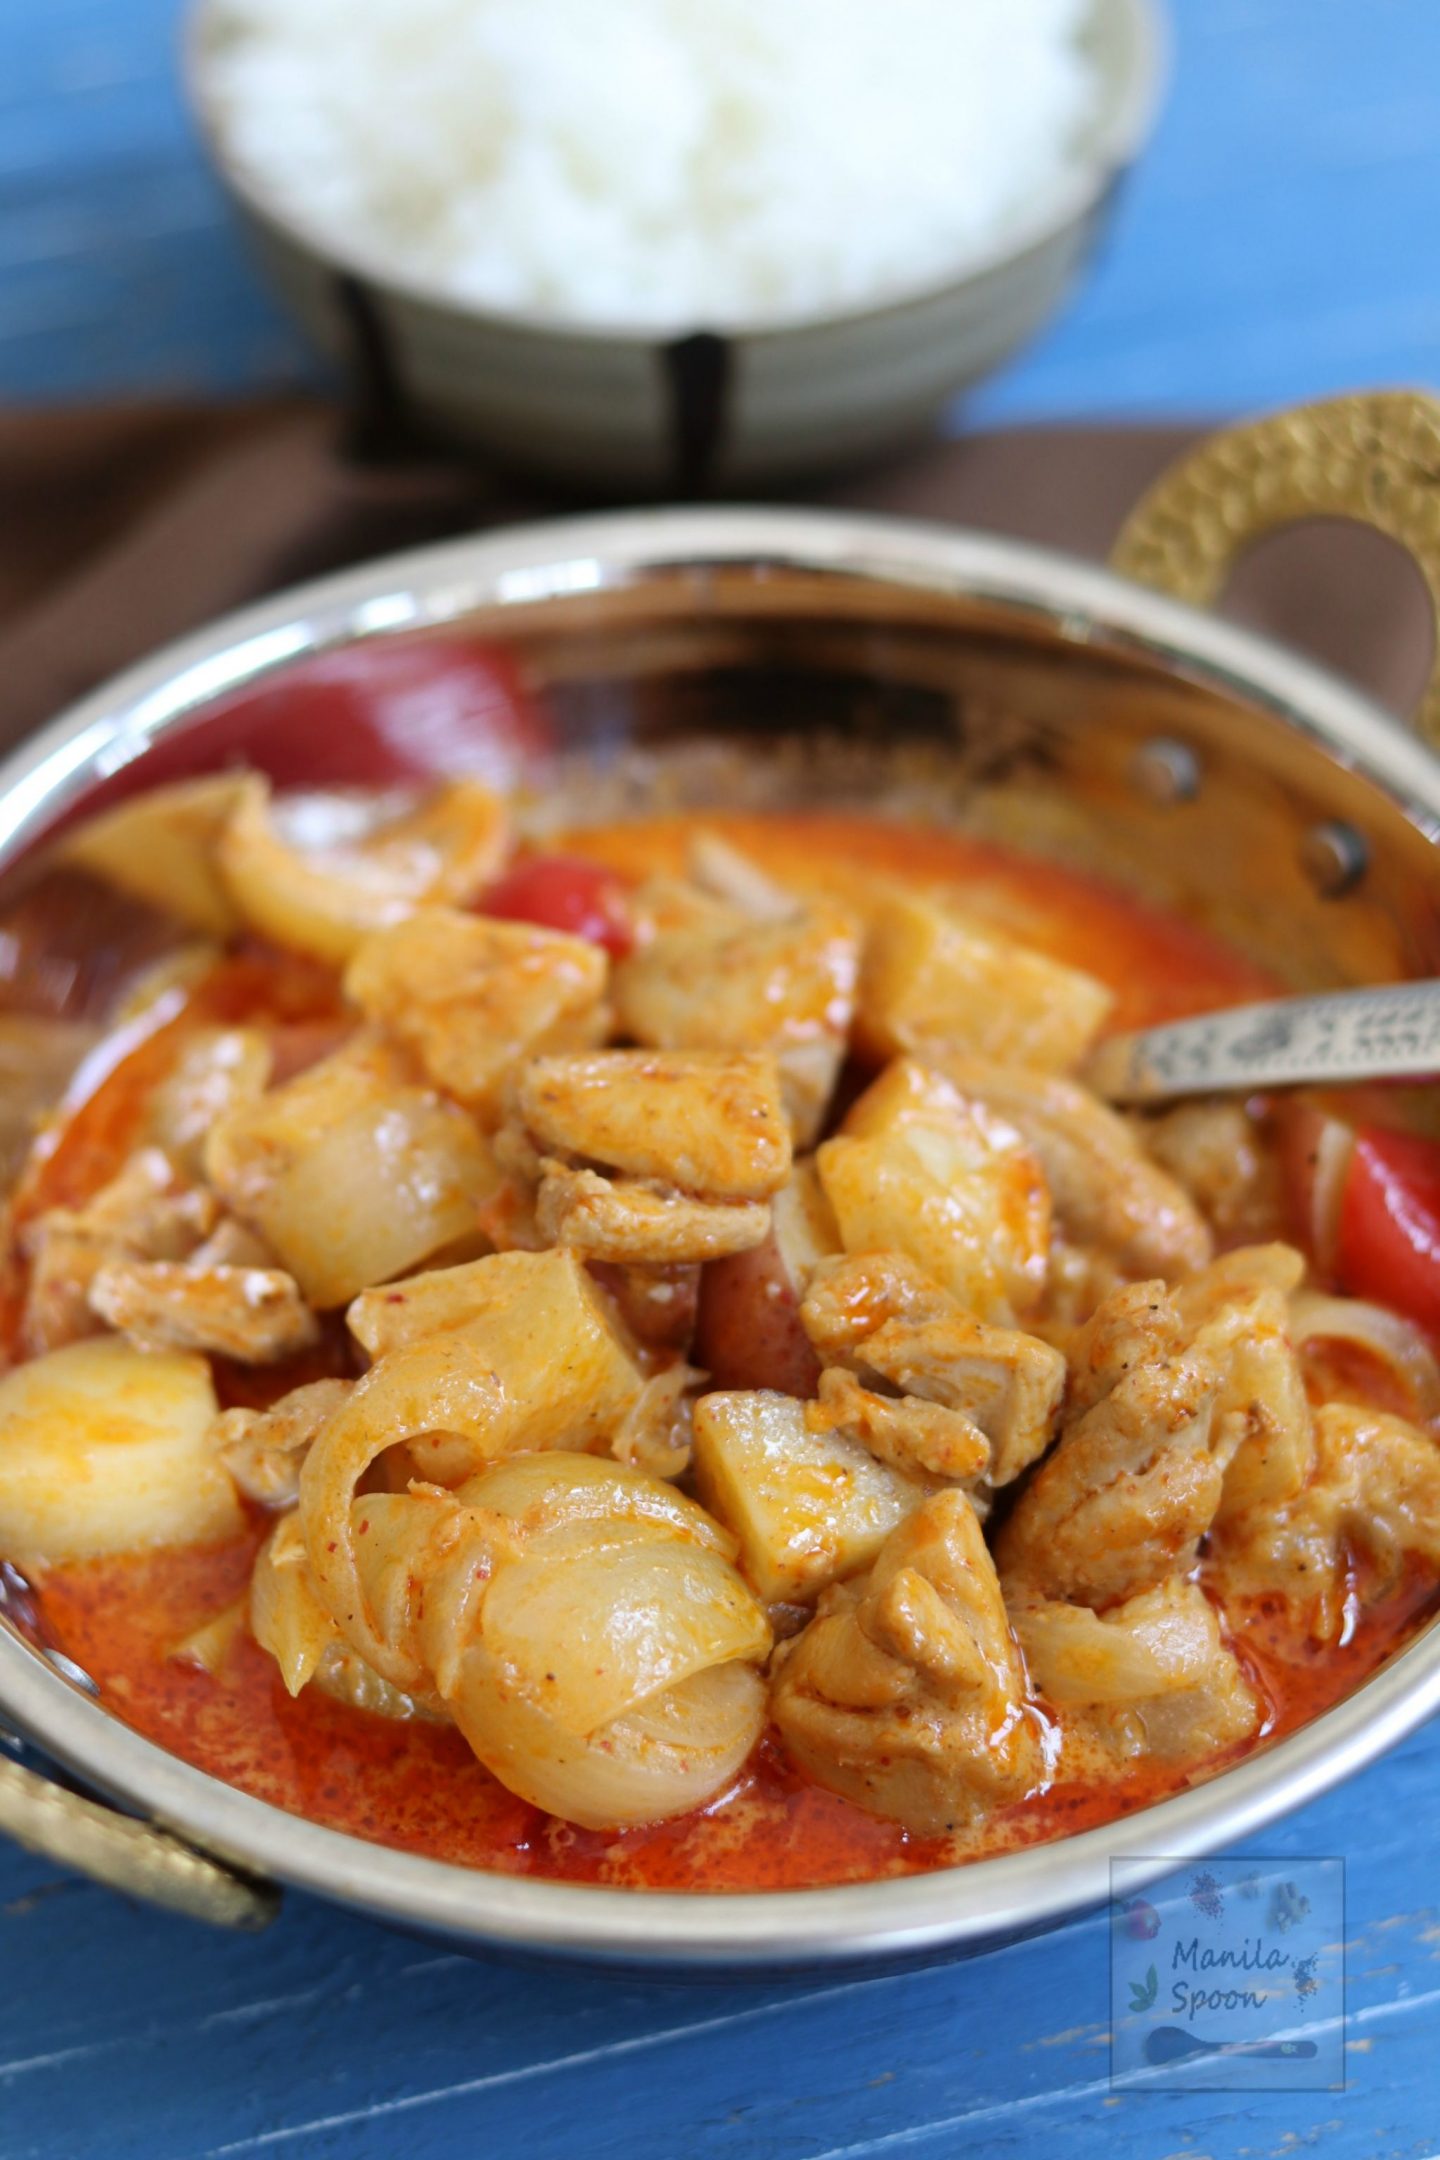 Quick and easy way to enjoy this deliciously mild Thai massaman chicken curry. No shortcut on flavors but prep time is a breeze! #massaman #chicken #curry